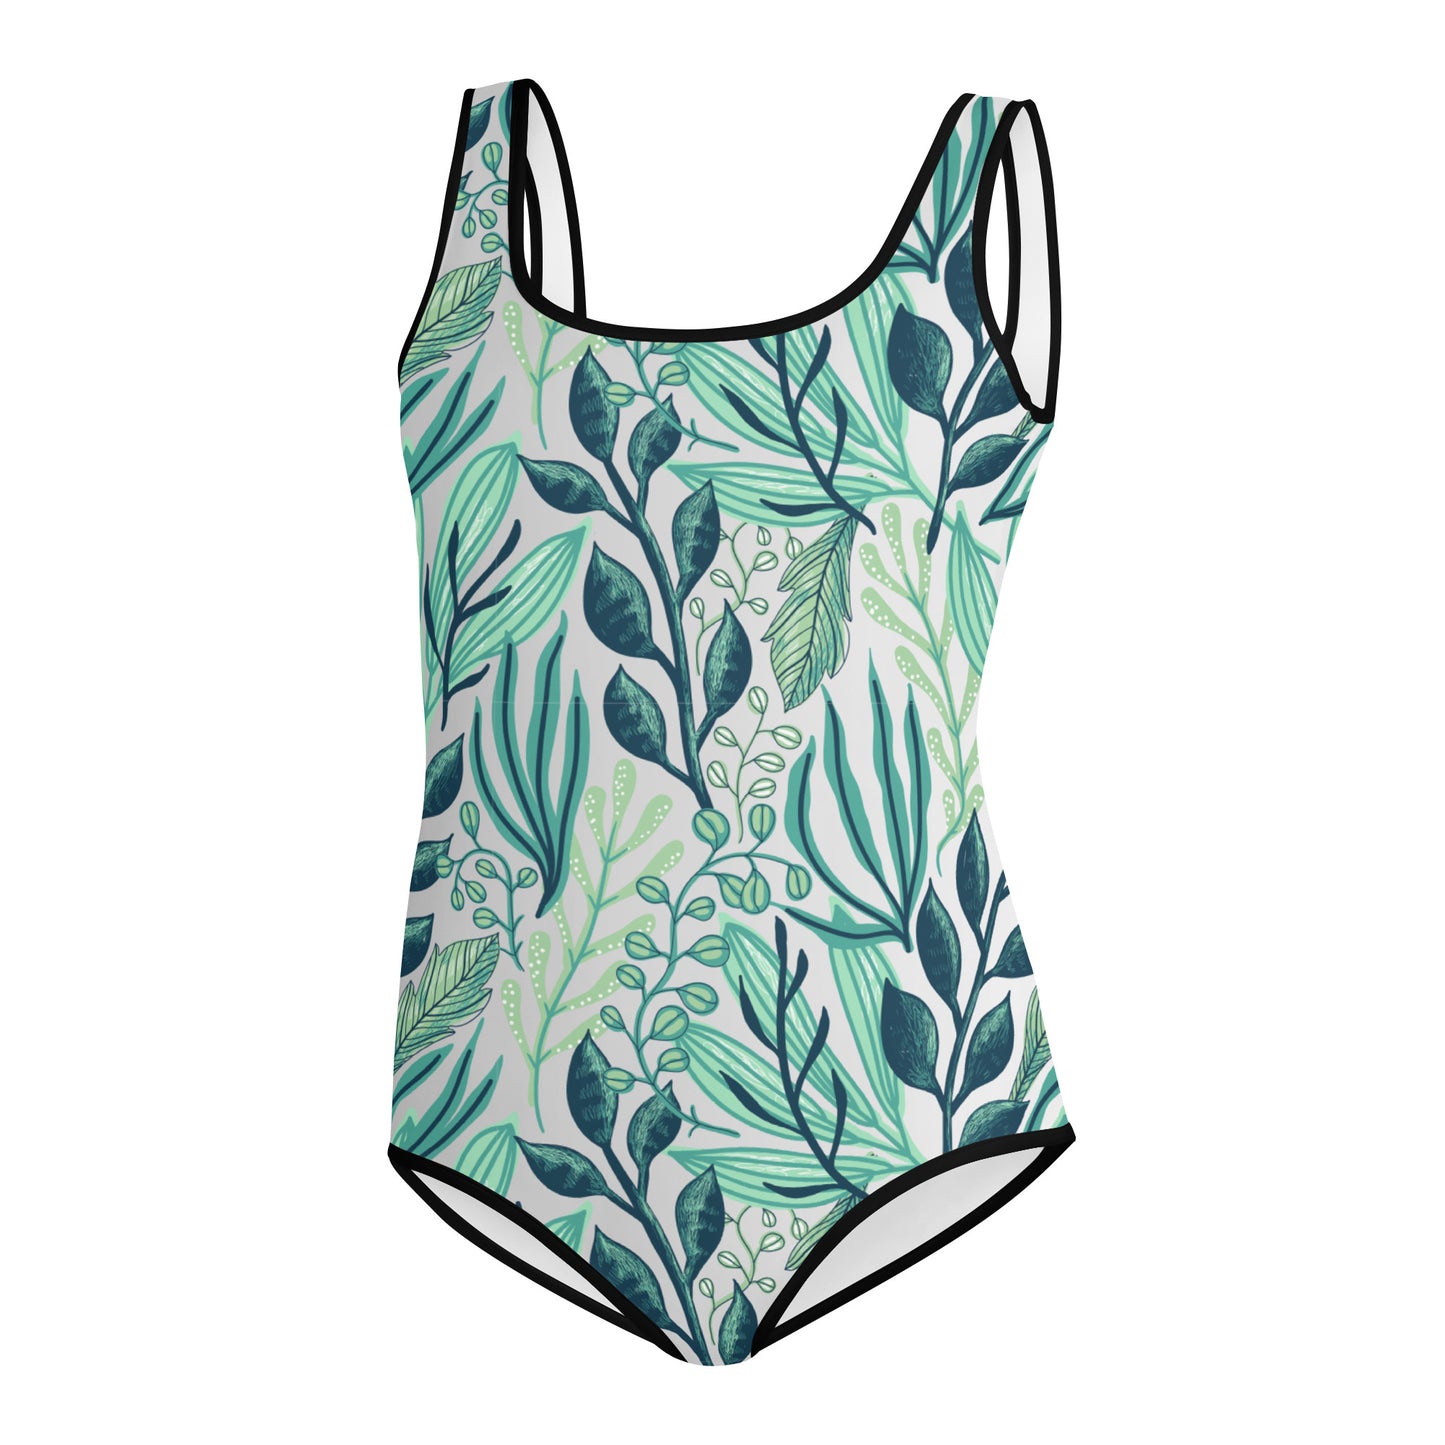 Sea Blossom Print Youth Swimsuit